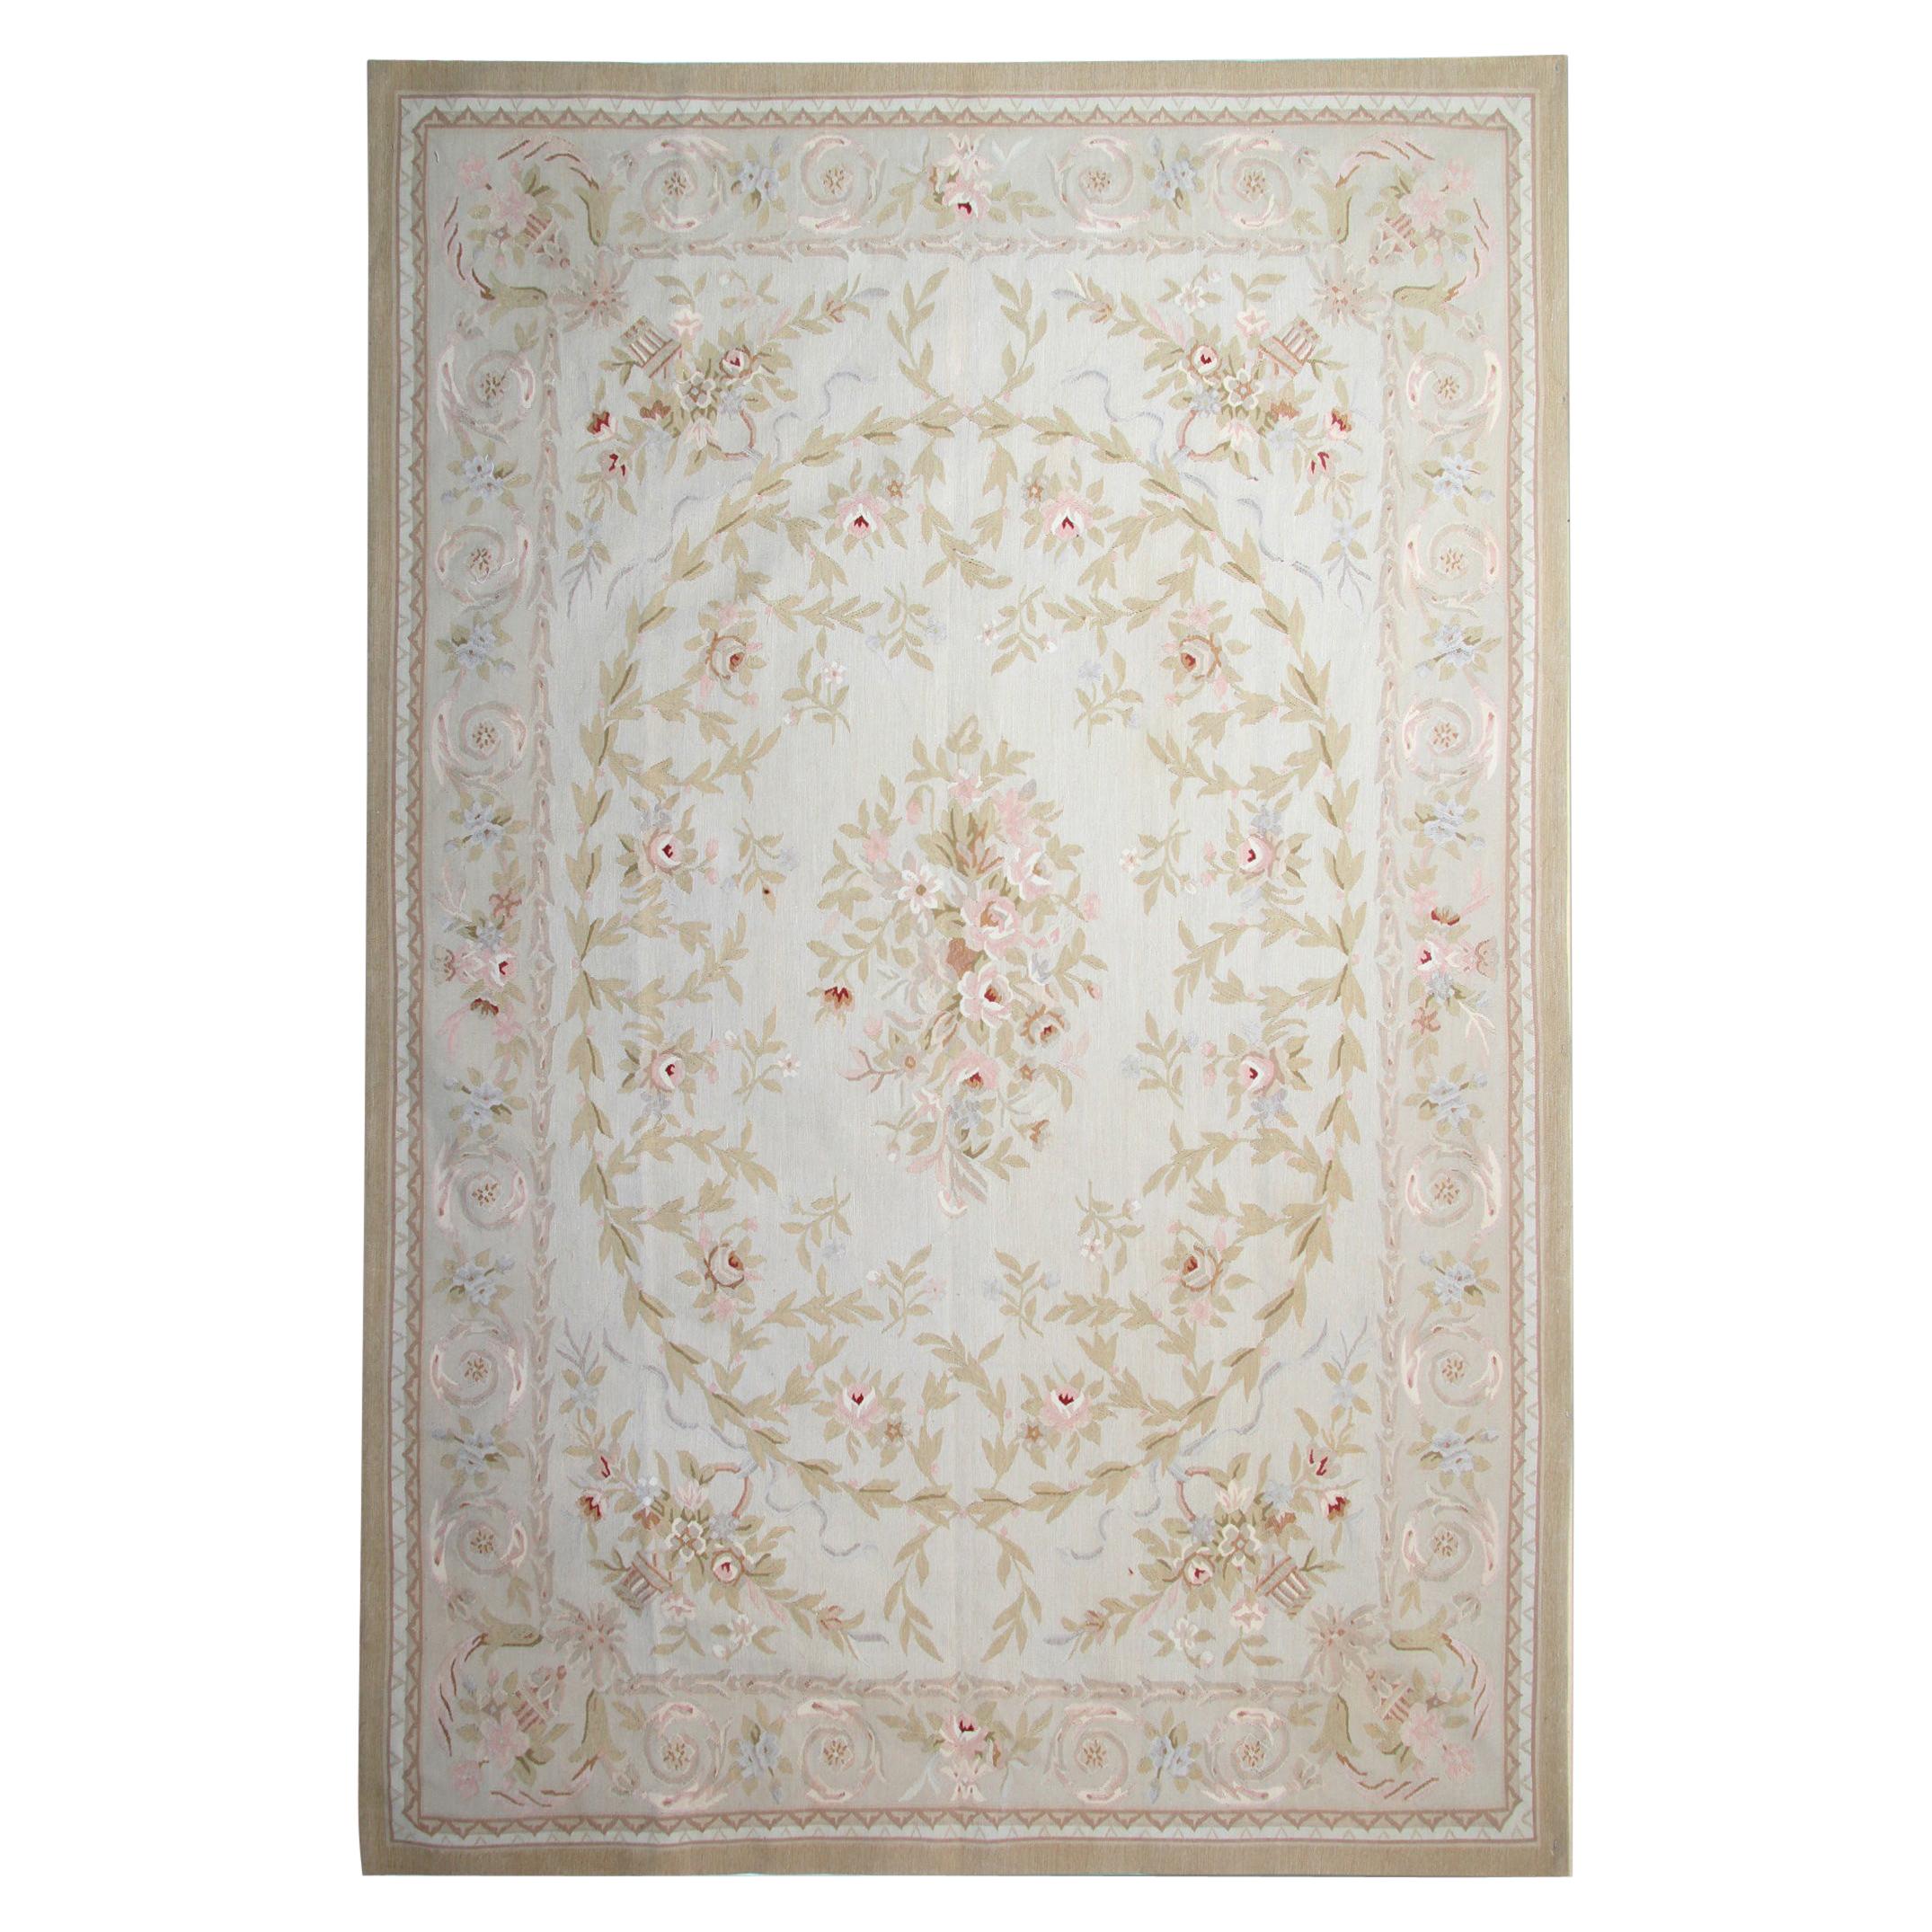 Medium Vintage Aubusson Style Area Rug Traditional Flat-Weave Rug For Sale